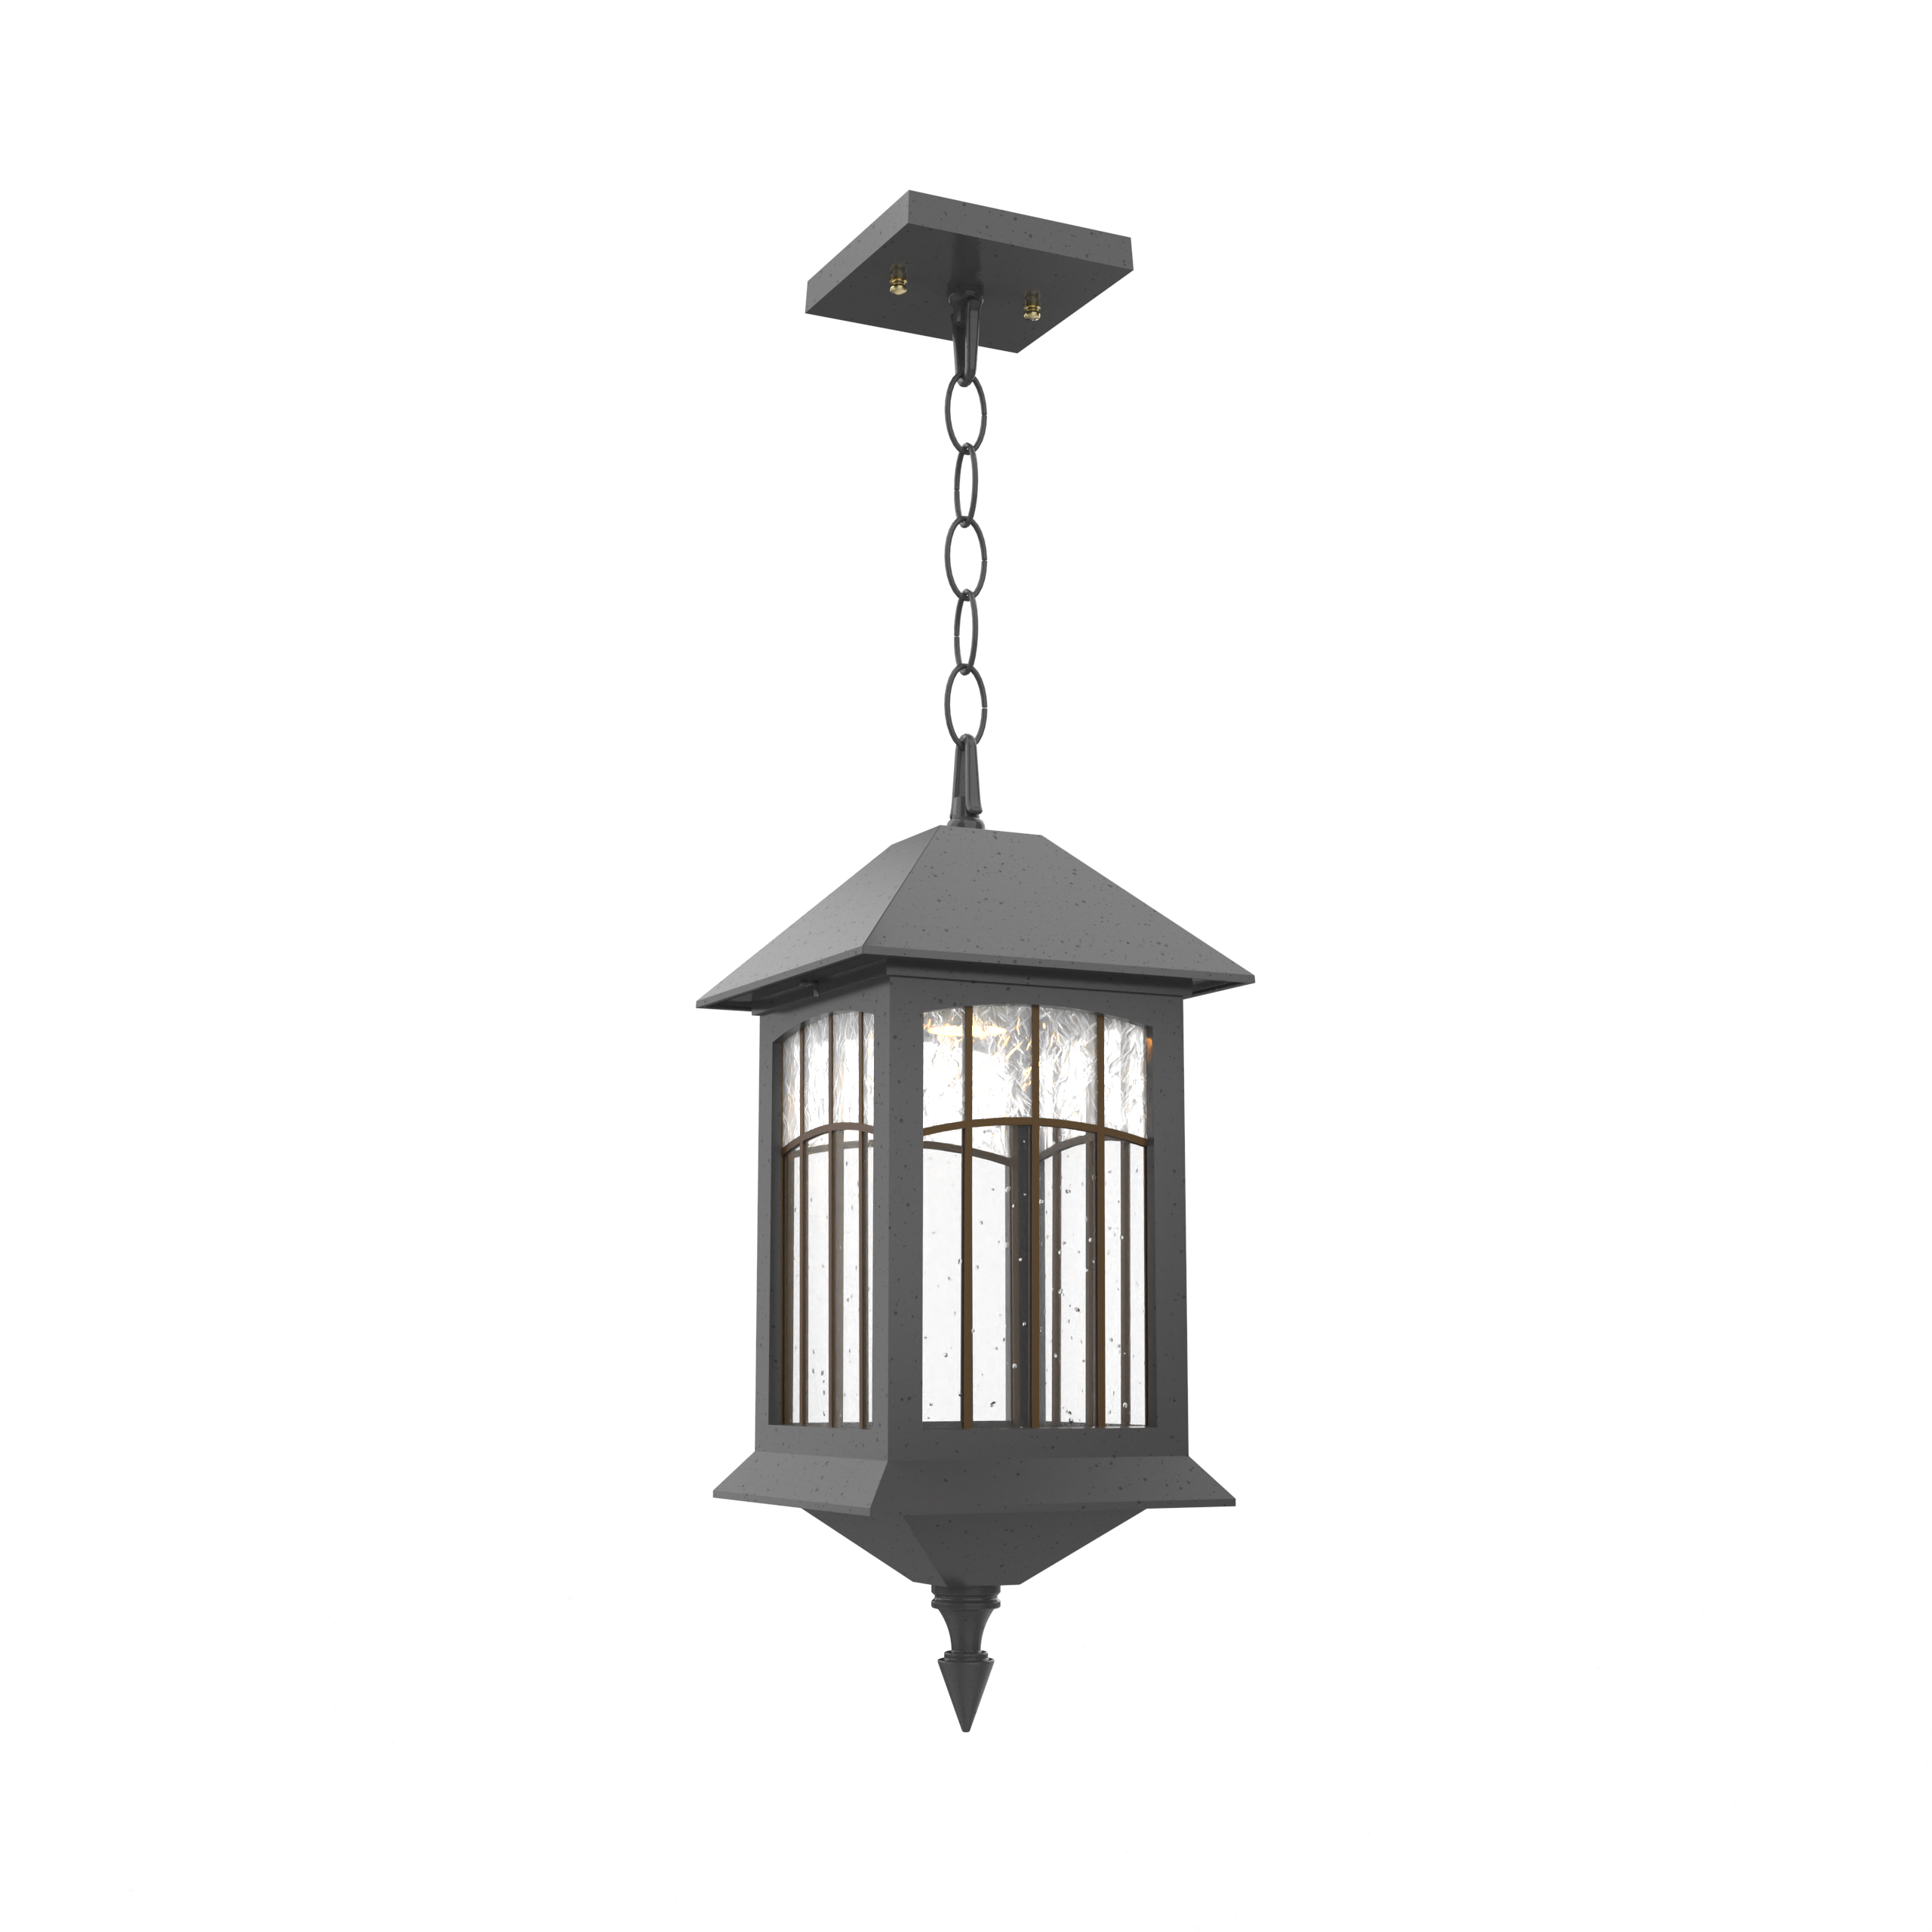 Havana - Ceiling mounting with chain closed bottom medium size - 23855